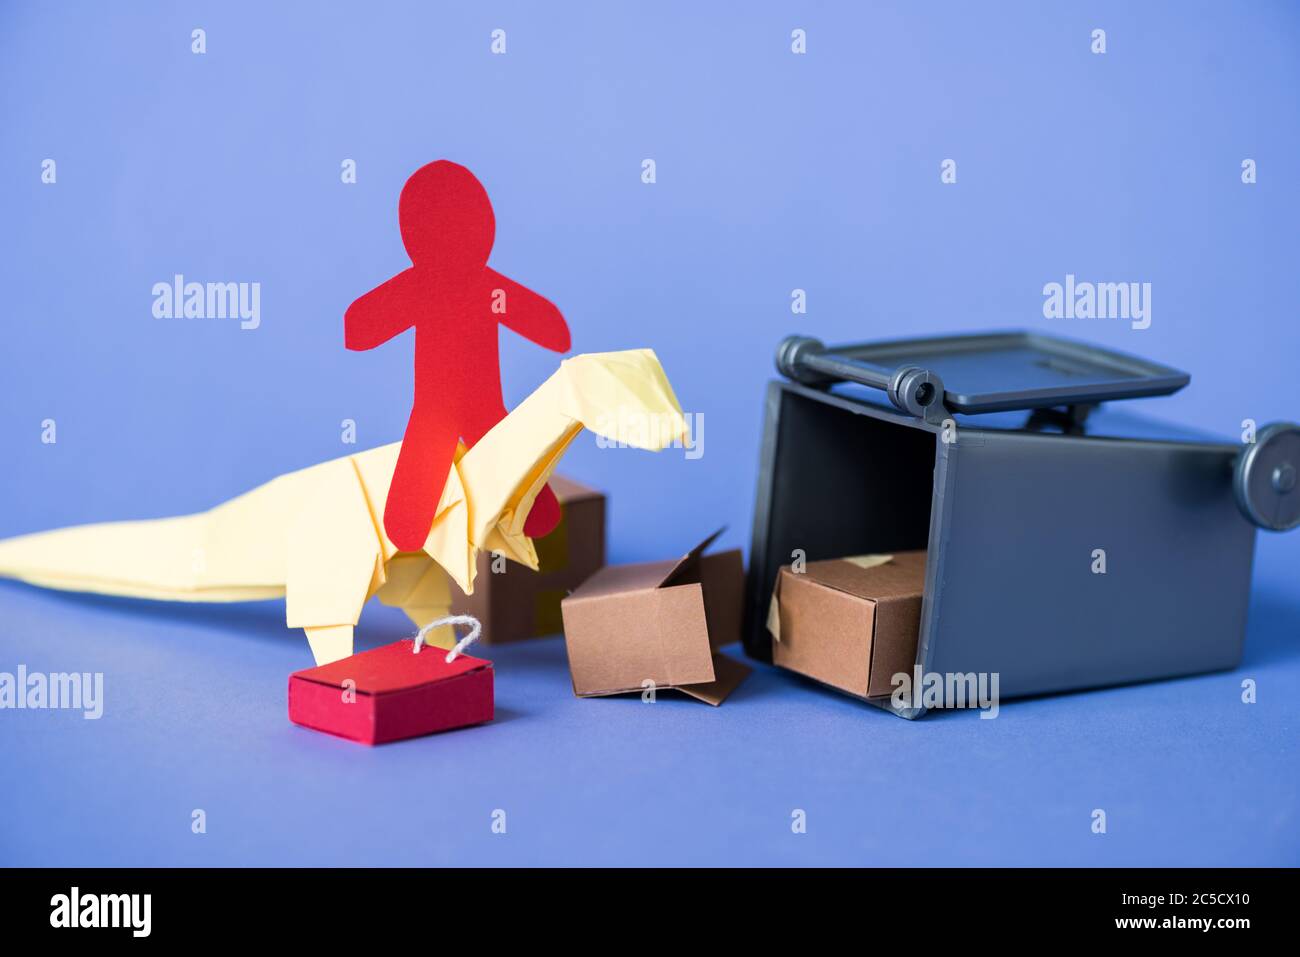 paper human on origami dinosaur near trash can and carton boxes on blue Stock Photo